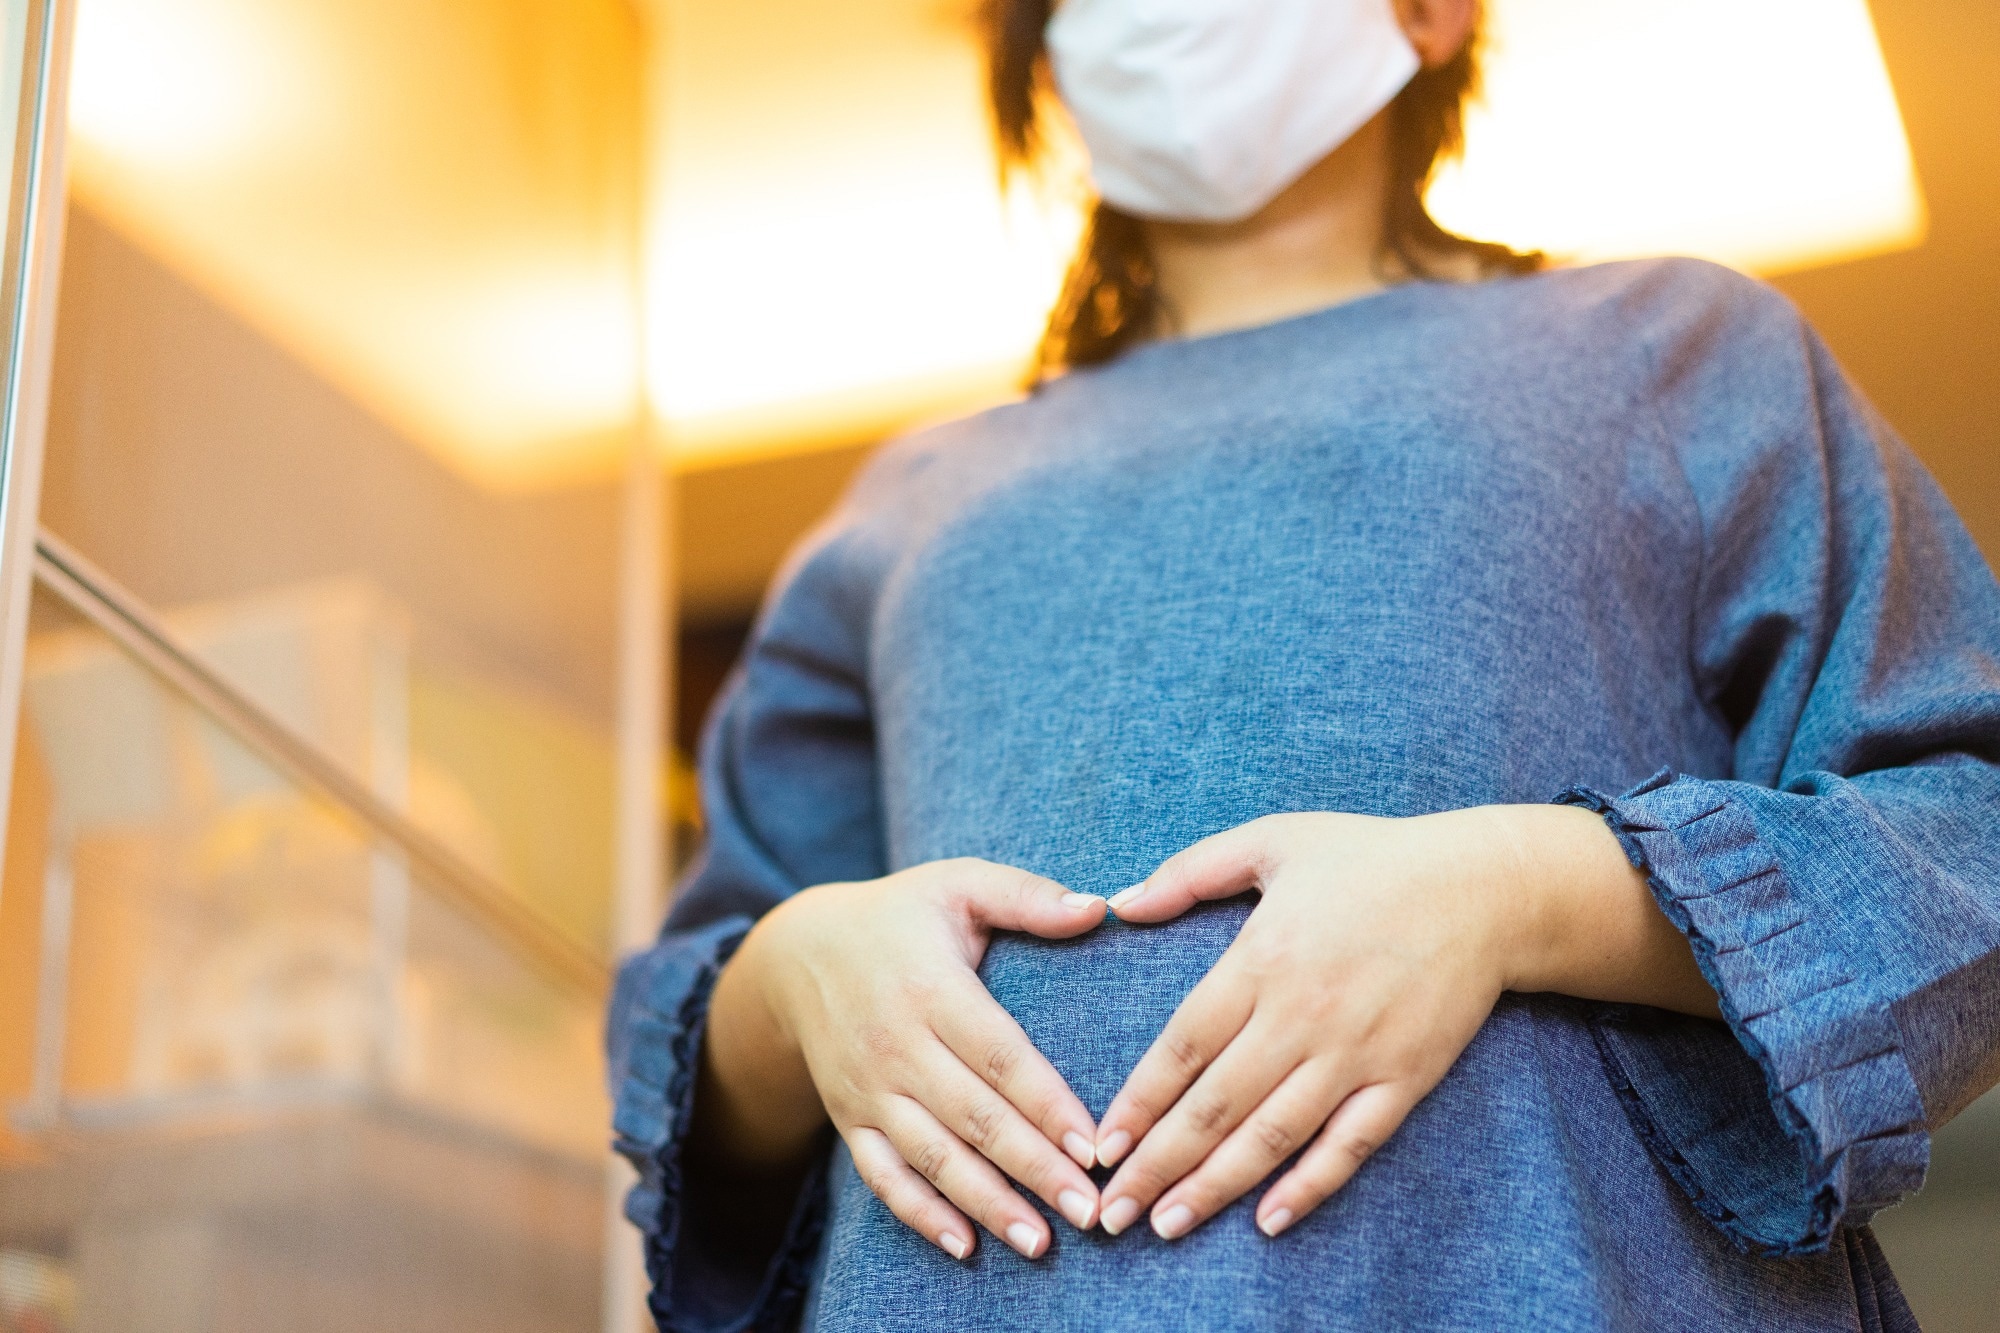 Study: Becoming a mother during the covid-19 pandemic: the lived experience as told by birthing mothers: a qualitative study. Image Credit: MIA Studio/Shutterstock